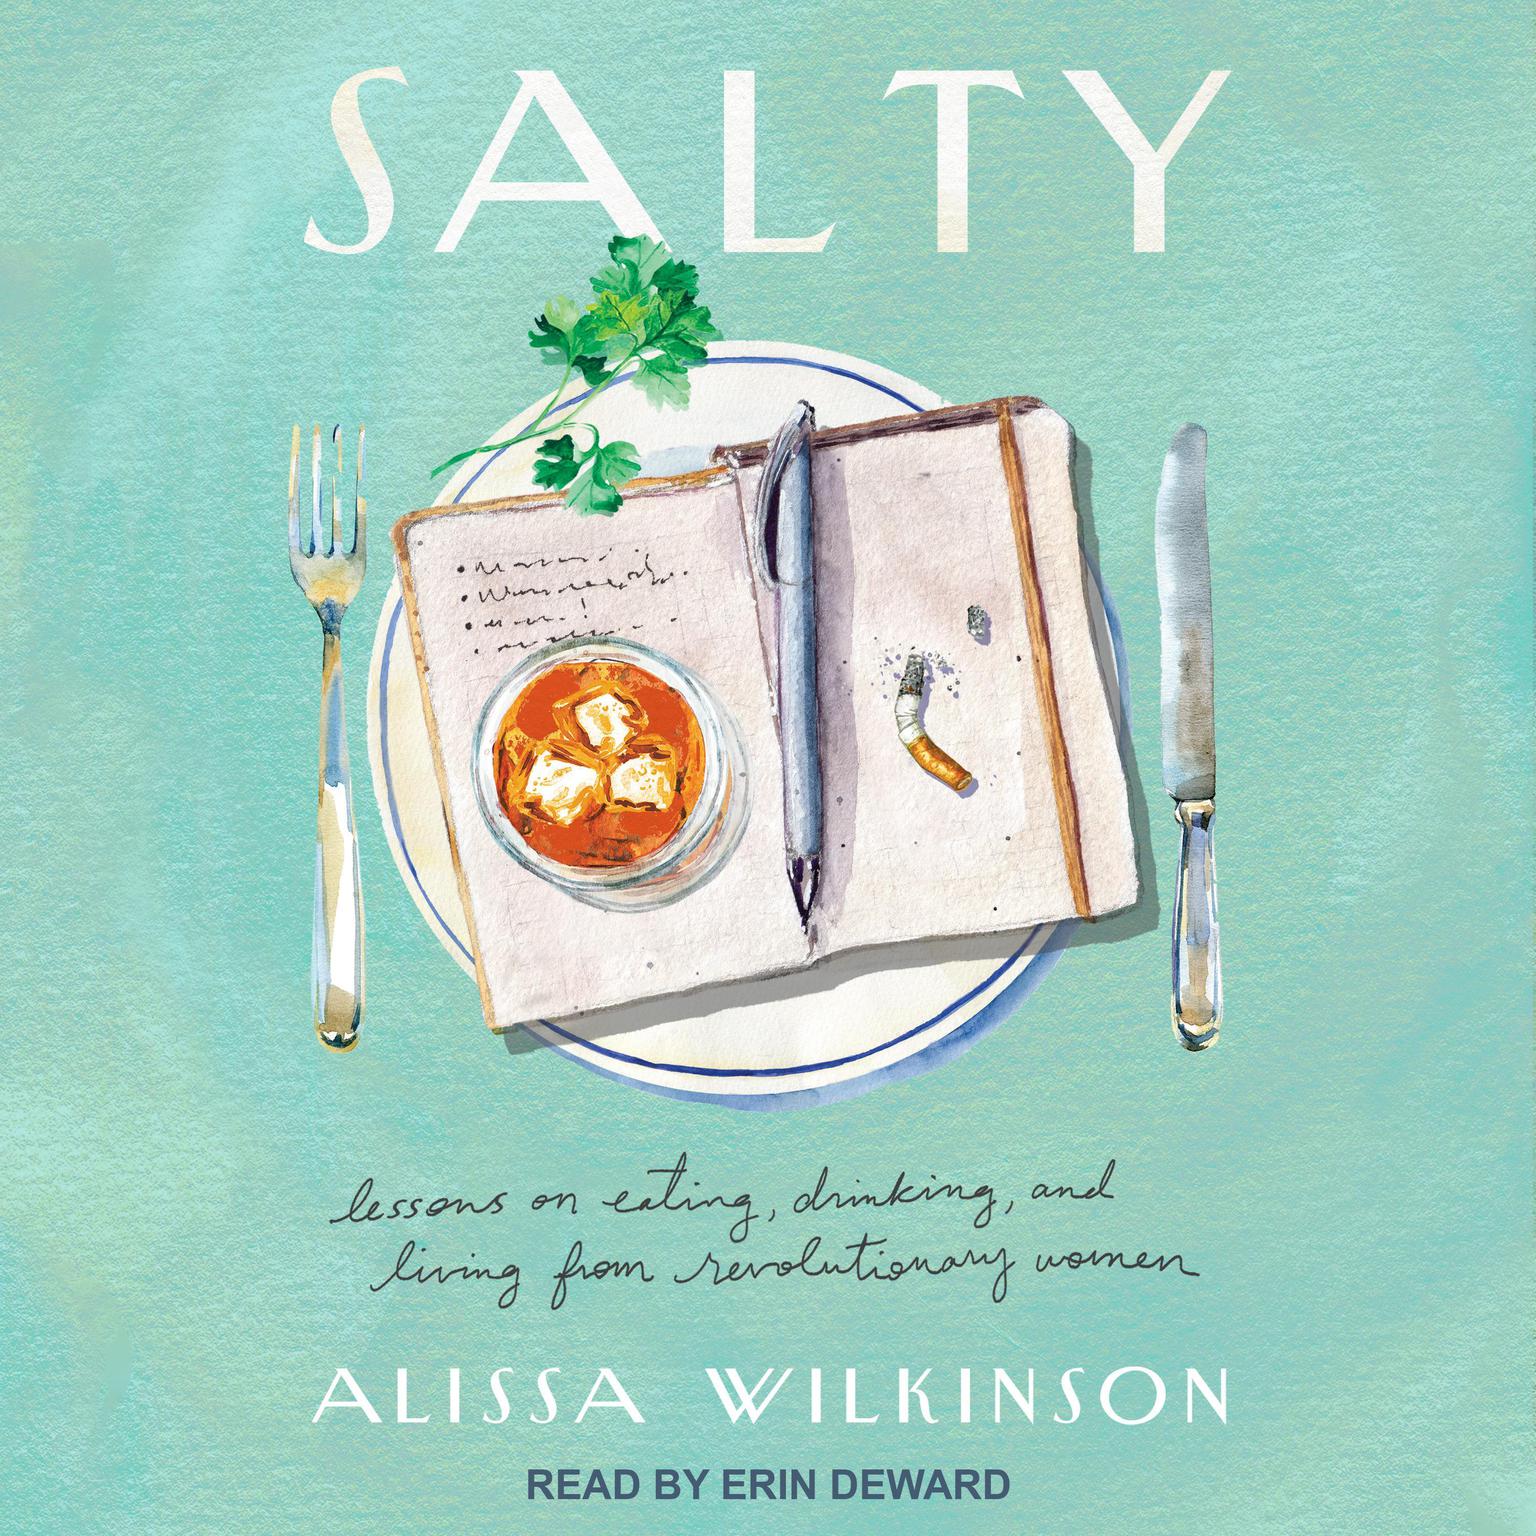 Salty: Lessons on Eating, Drinking, and Living from Revolutionary Women Audiobook, by Alissa Wilkinson